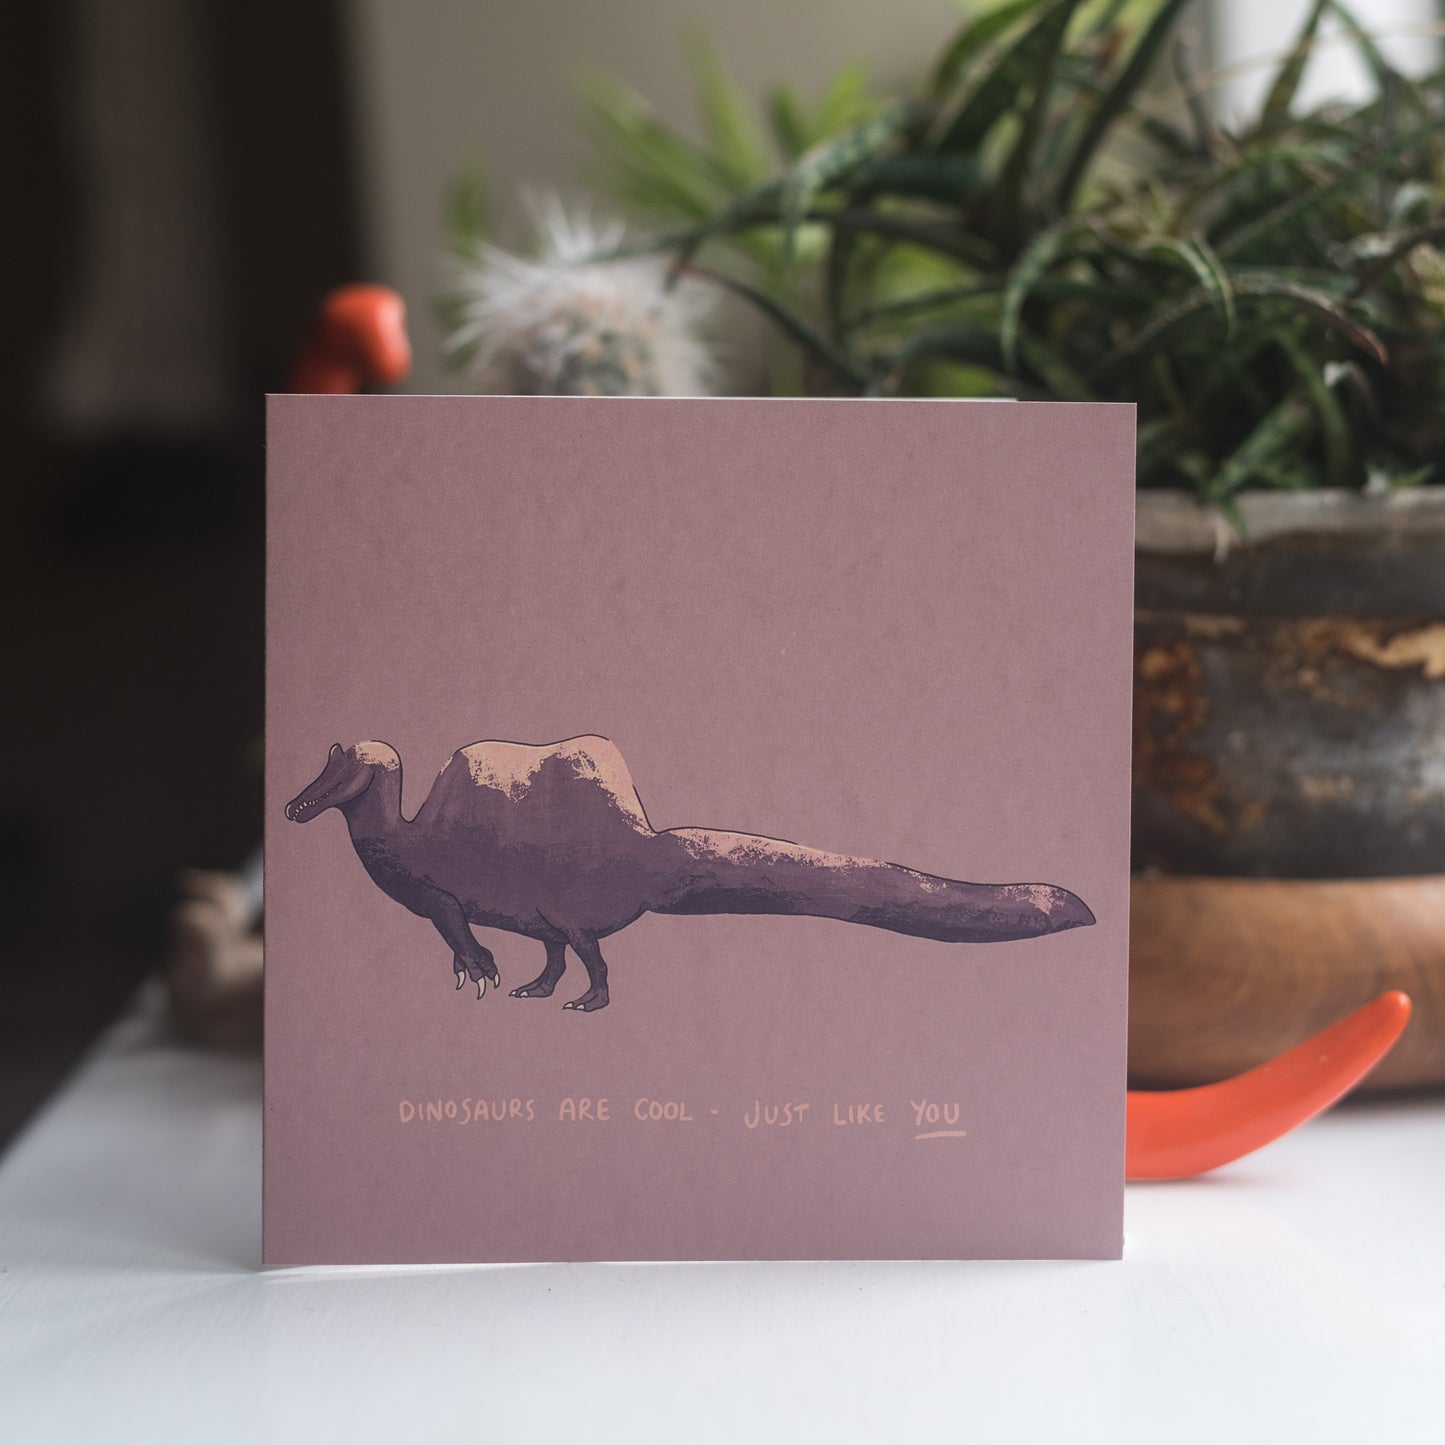 Spinosaurus Dinosaurs Are Cool Just Like You Greetings Card